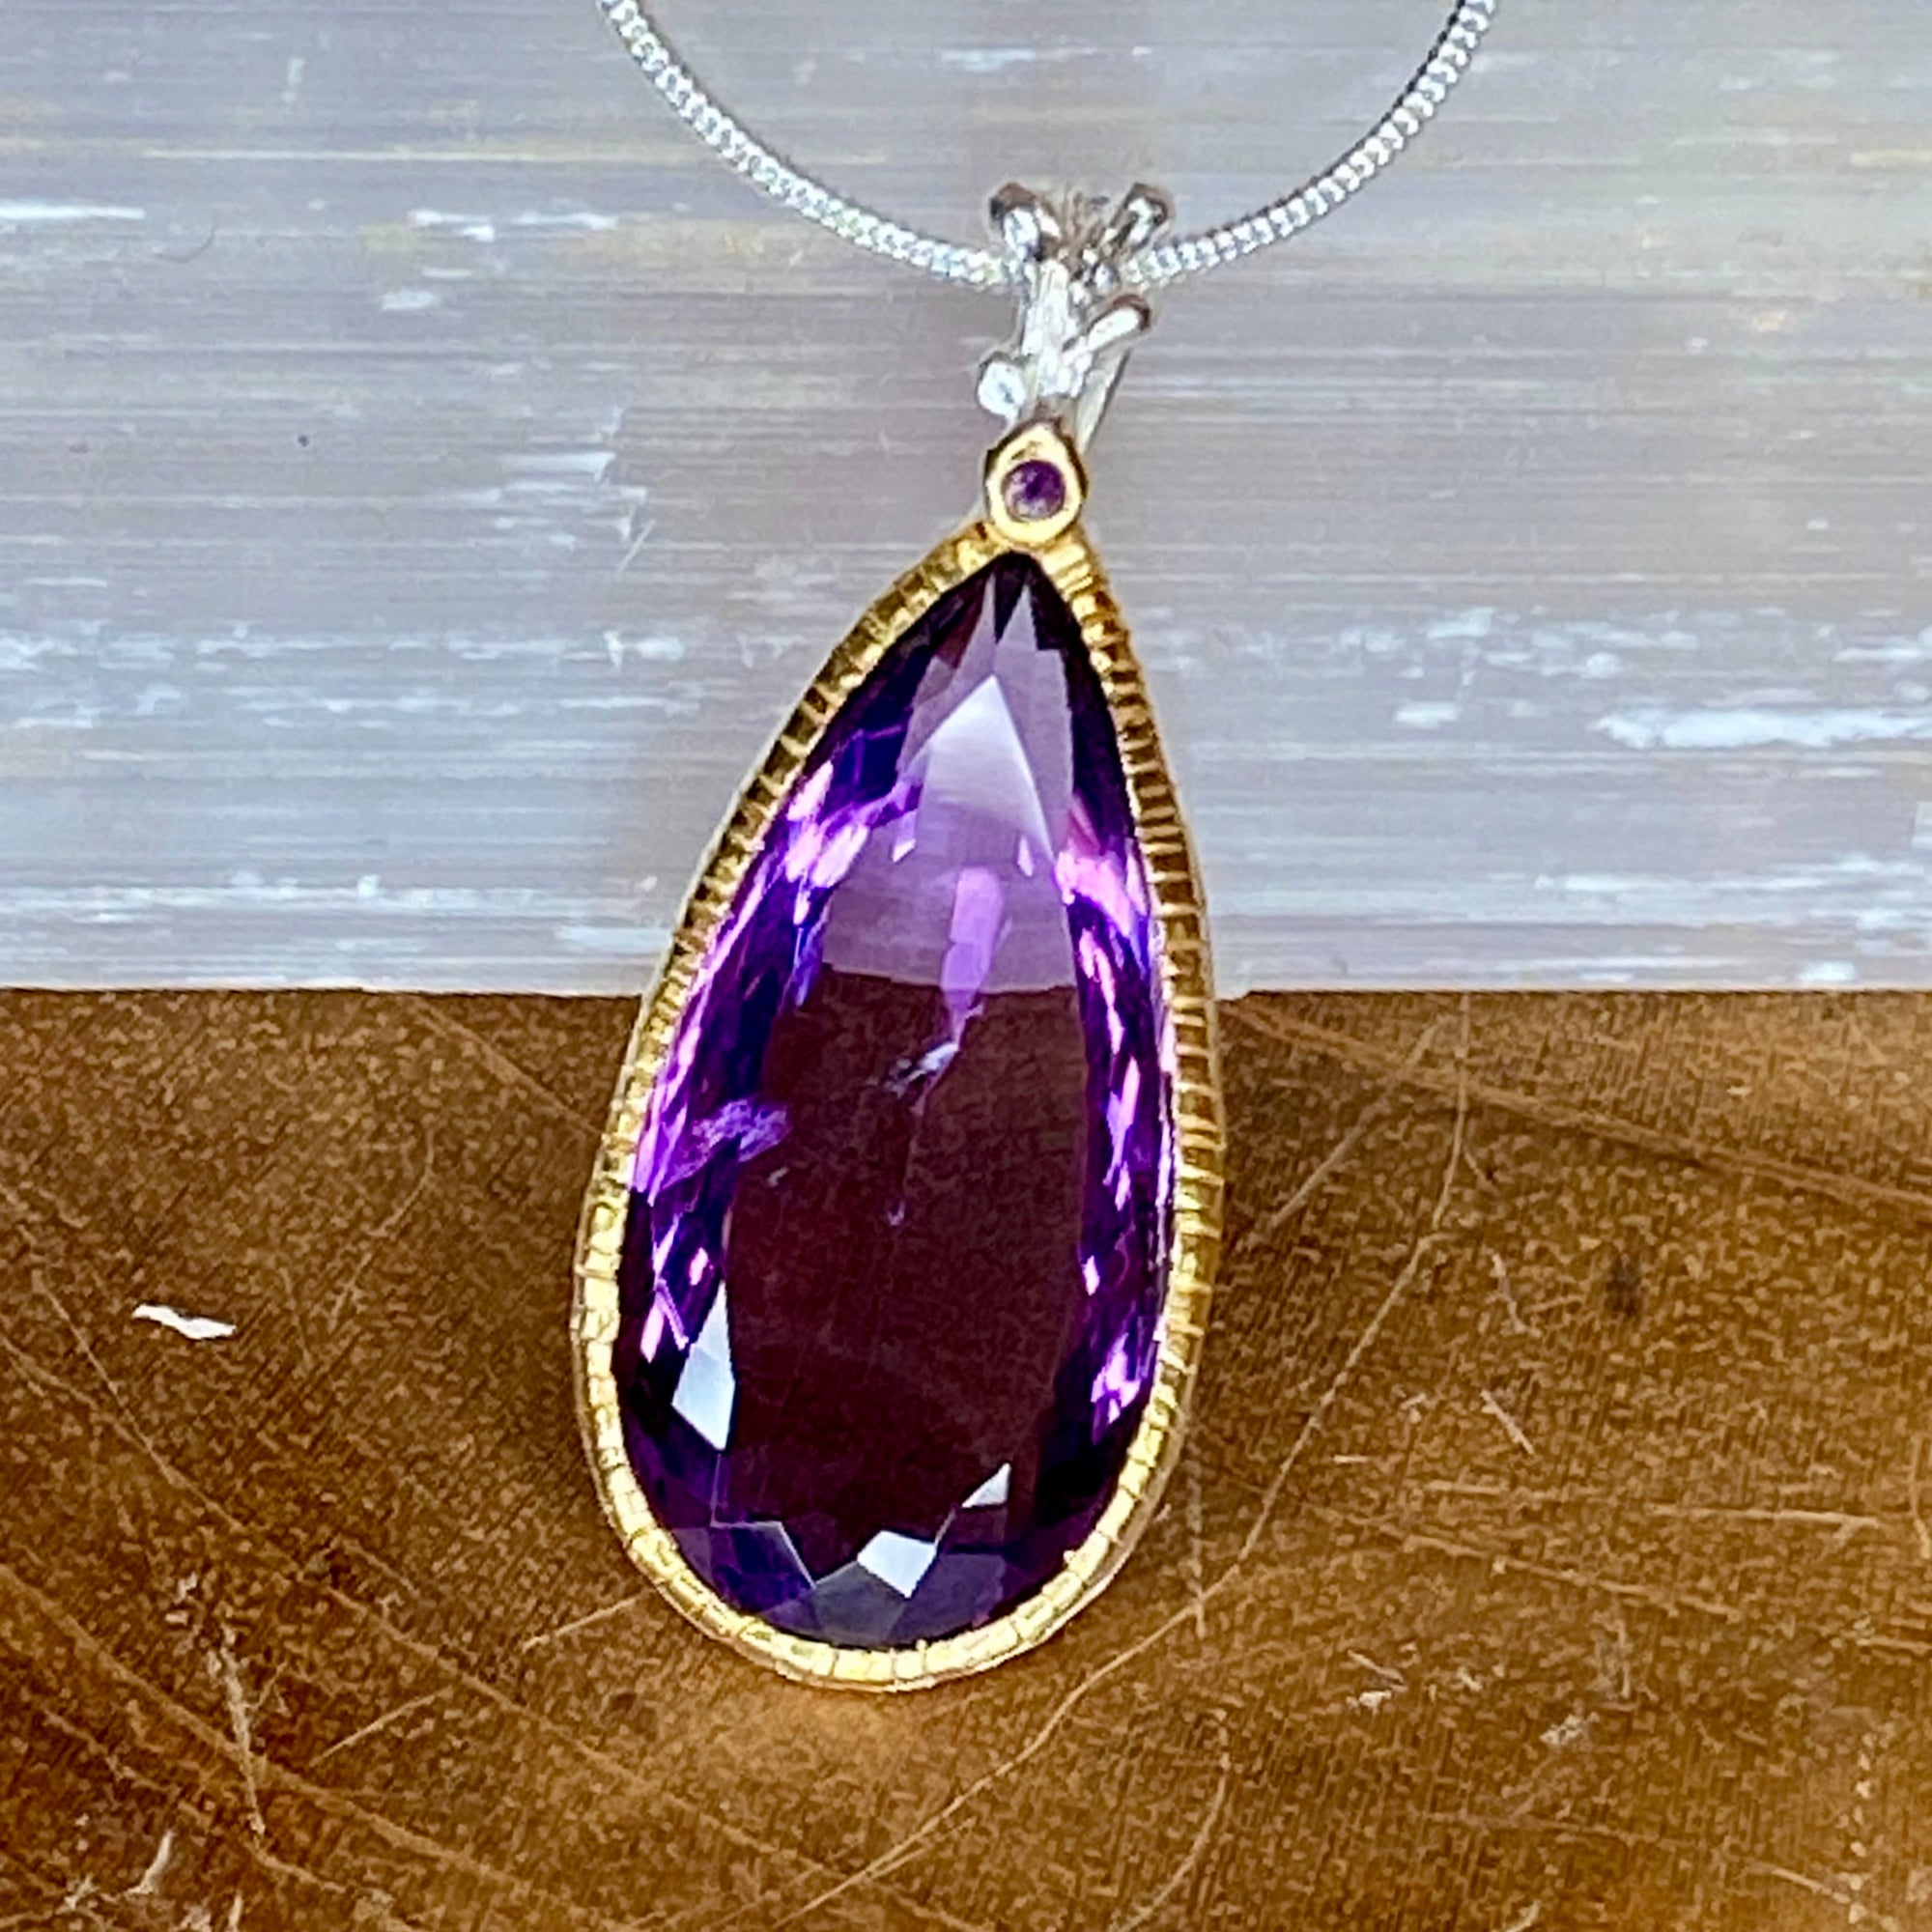 Handmade 26ct Natural Amethyst 925 Sterling Silver Pendant - The Spirit of Life